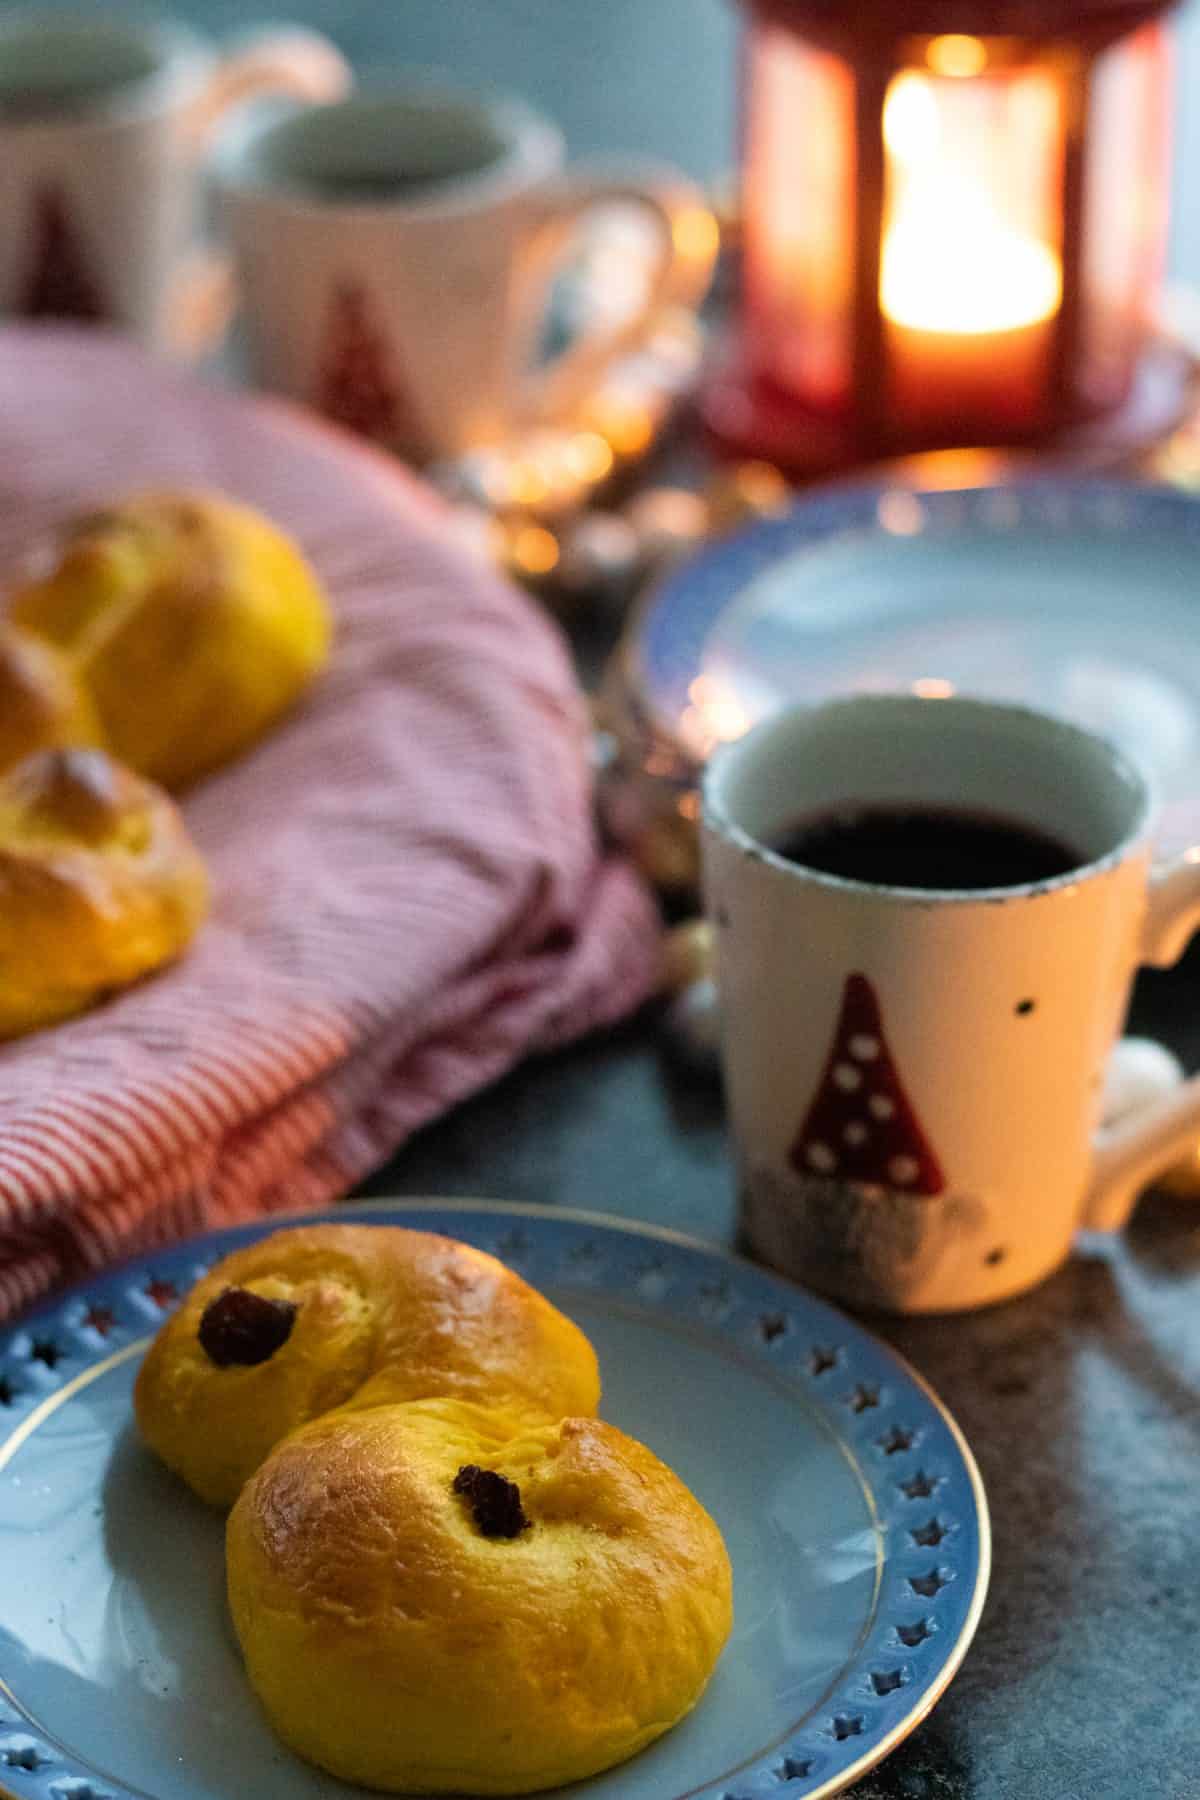 a Swedish saffron bun on a plate in front of a cup of glögg